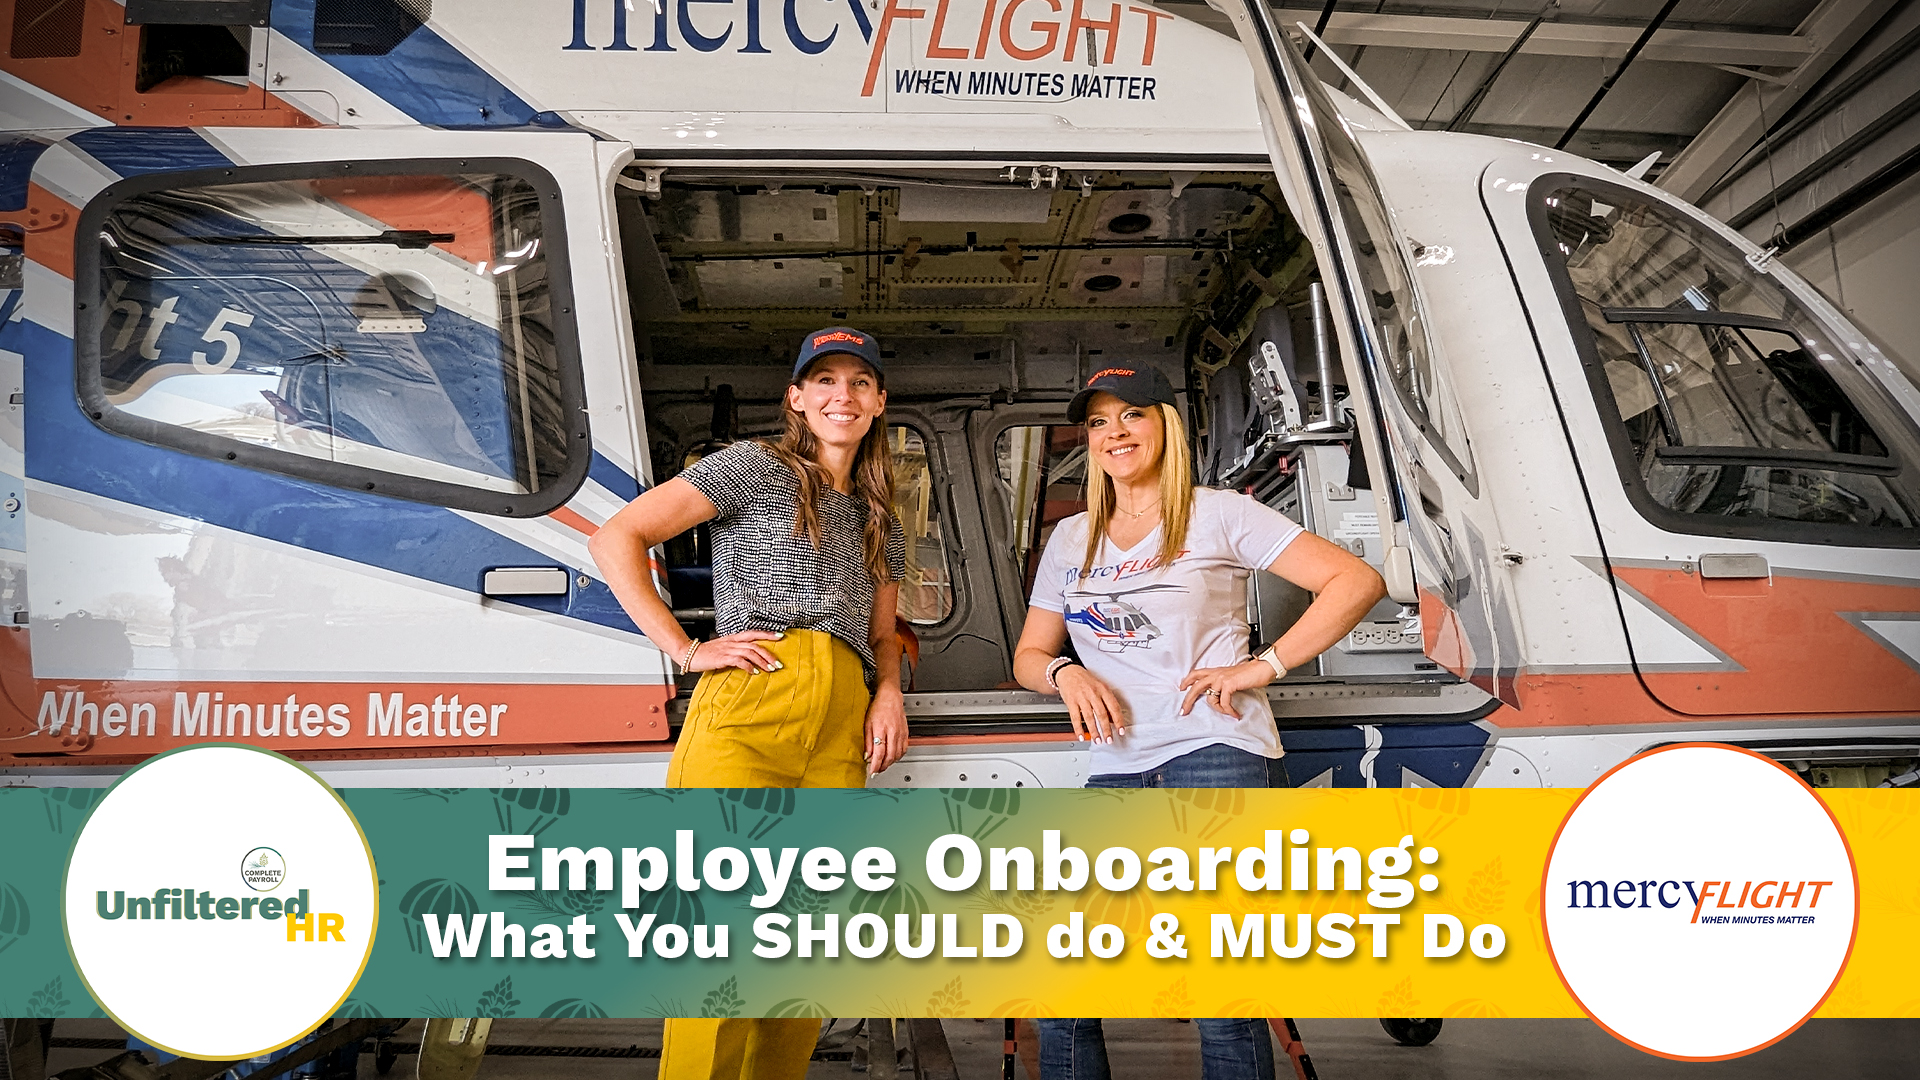 Employee Onboarding: Must-Do's and Should Do's | Unfiltered HR